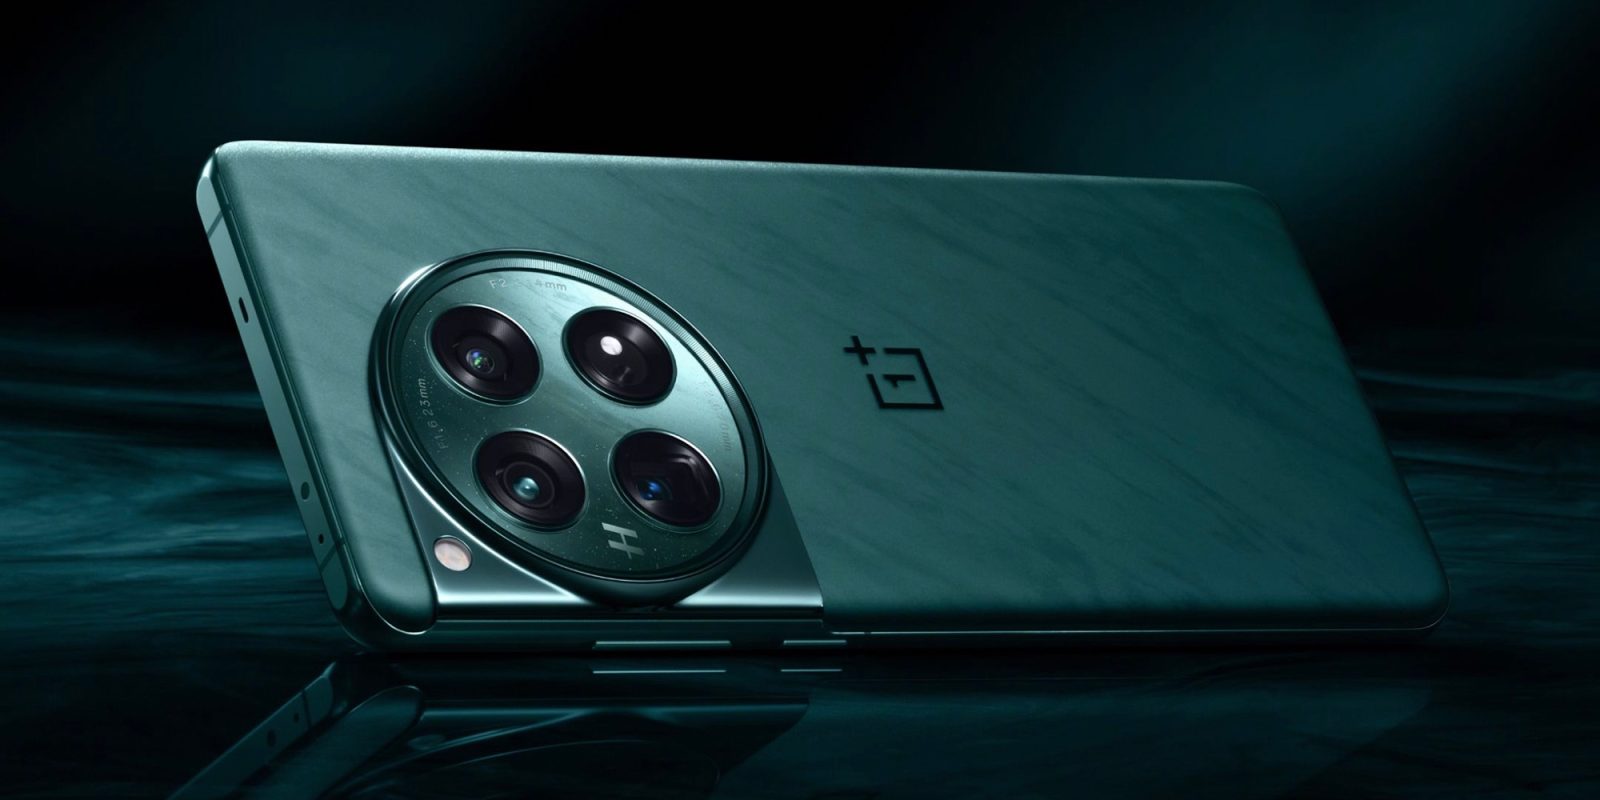 OnePlus 12 smartphone: specs, release date and price of the flagship phone